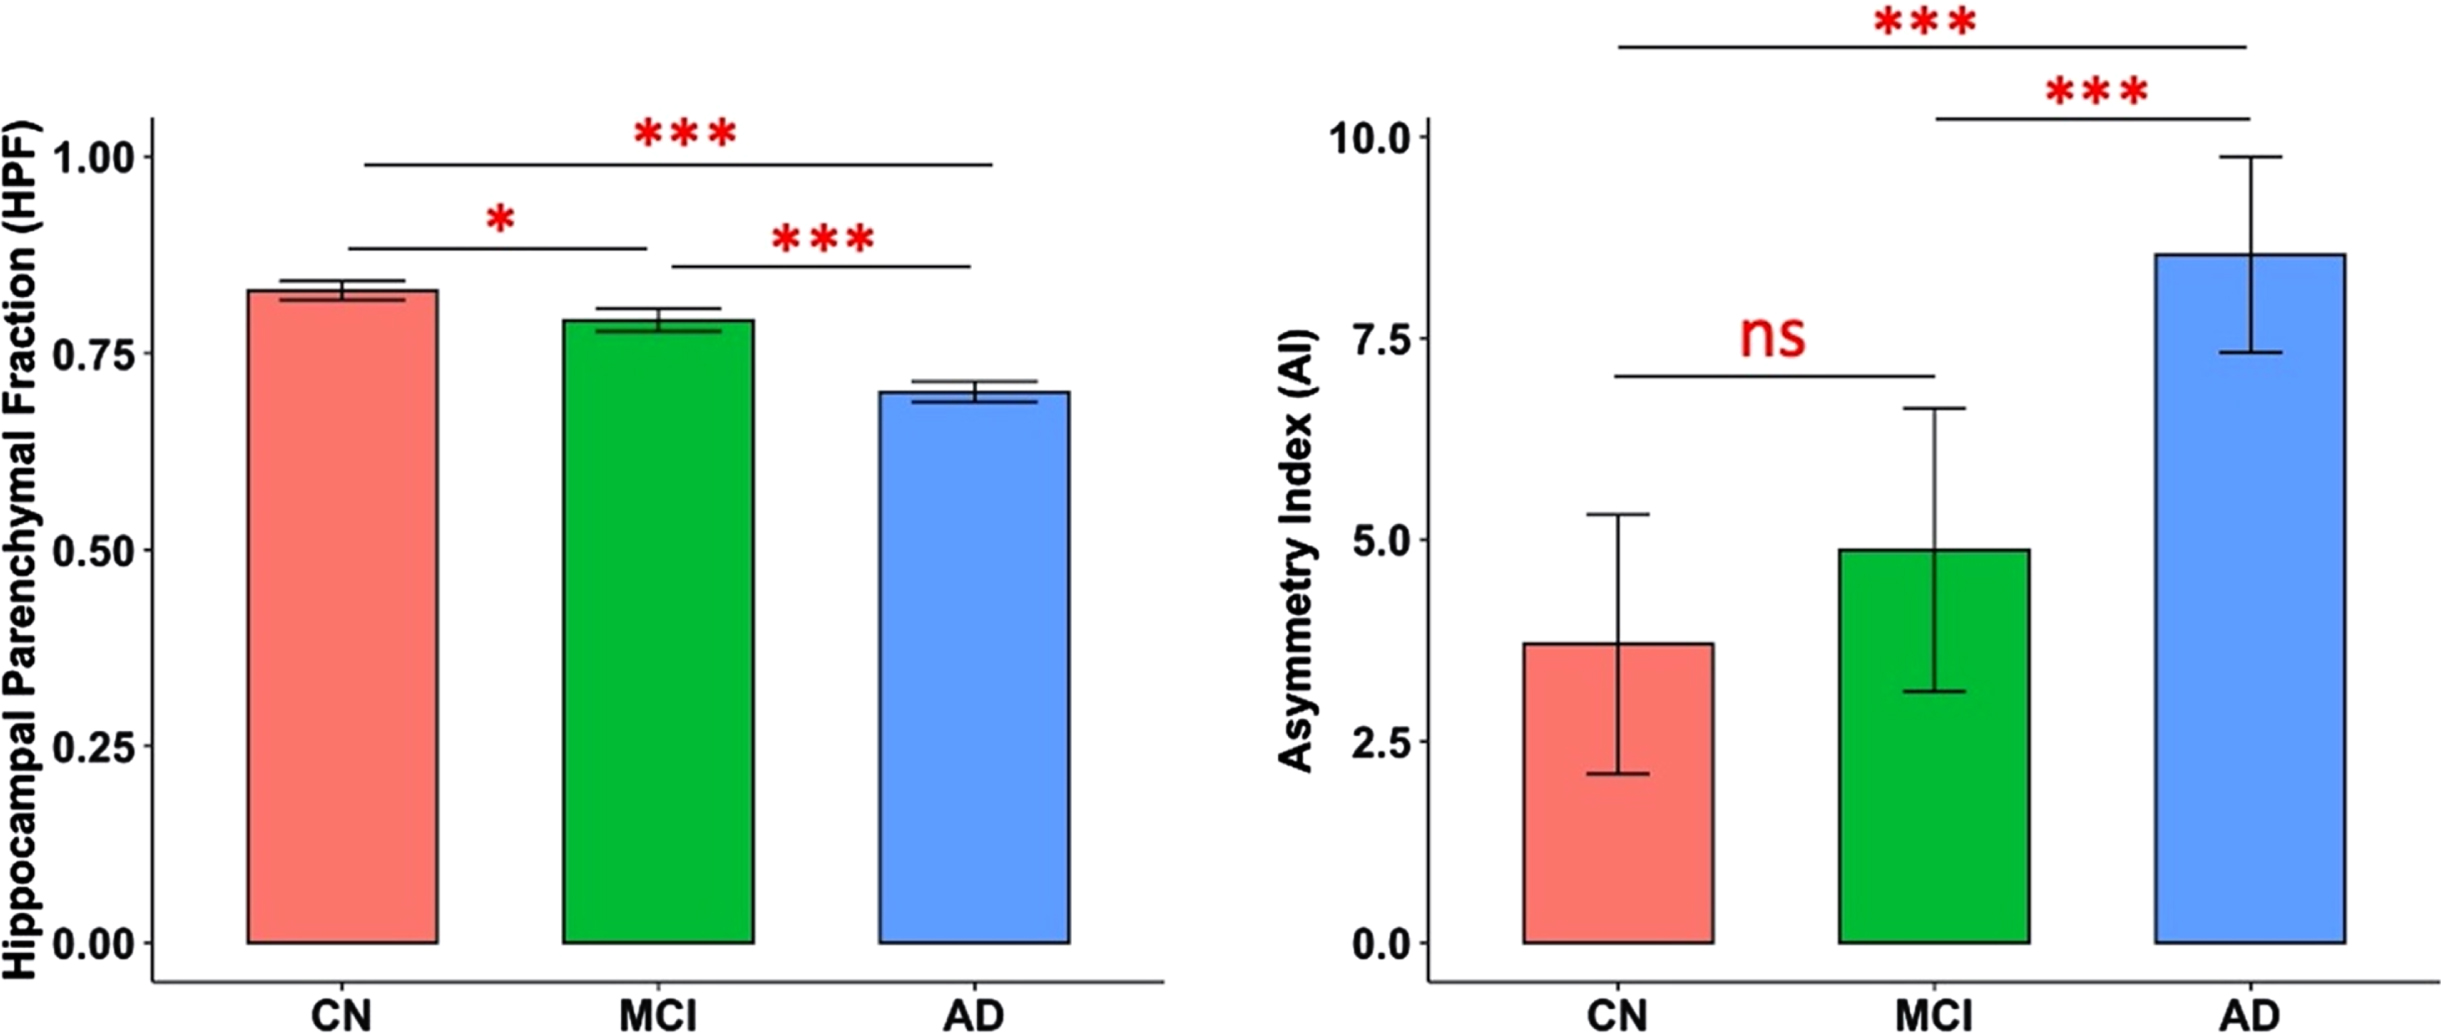 Predicted marginal means of the hippocampal parenchymal fraction (HPF, averaged across hemispheres) and asymmetry index (AI) in different groups. Both HPF and AI were found to be significantly different between CN and AD groups (p < 0.001) and between MCI and AD groups (p < 0.001); and HPF was also found significantly different between CN and MCI groups (p = 0.02). Error bars indicate 95% CI. ***p < 0.001; *p < 0.05; ns, not significant.